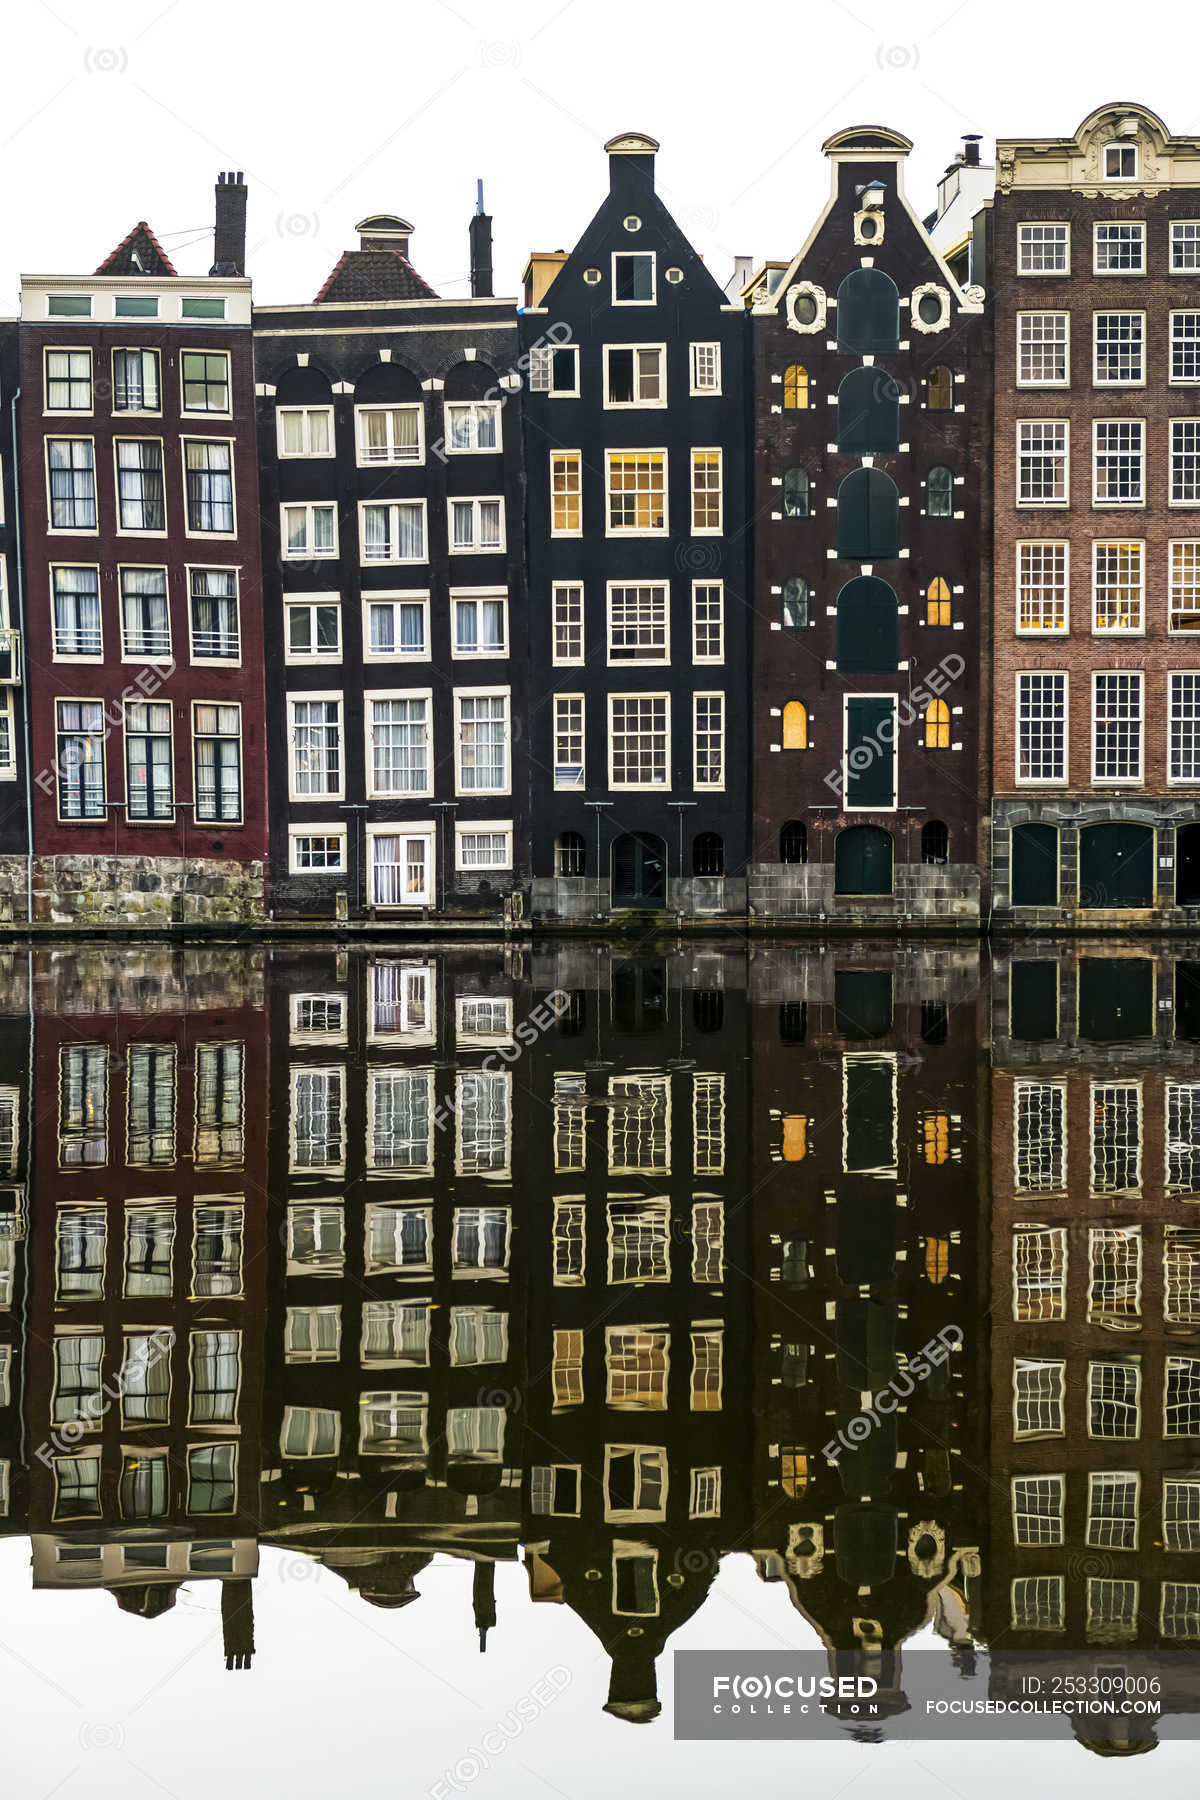 lint Poort radicaal Building facades with a mirror image reflecting in a canal; Amsterdam,  Netherlands — place of interest, buildings - Stock Photo | #253309006